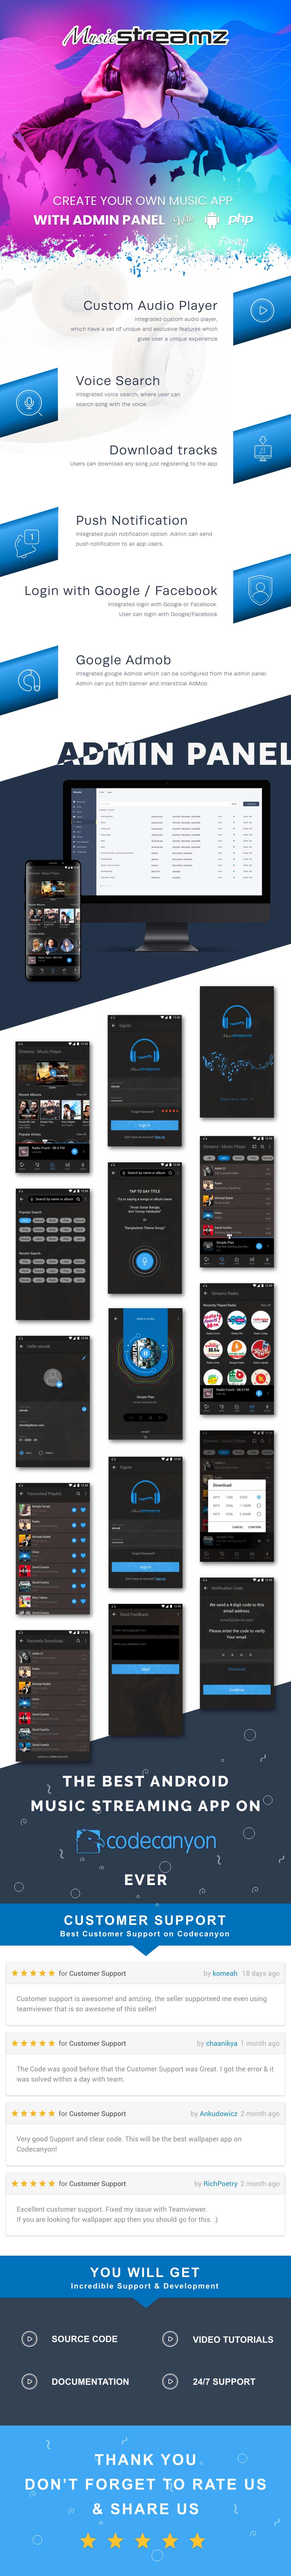 Streamz - A Music Streaming Android App With Admin Panel - 8